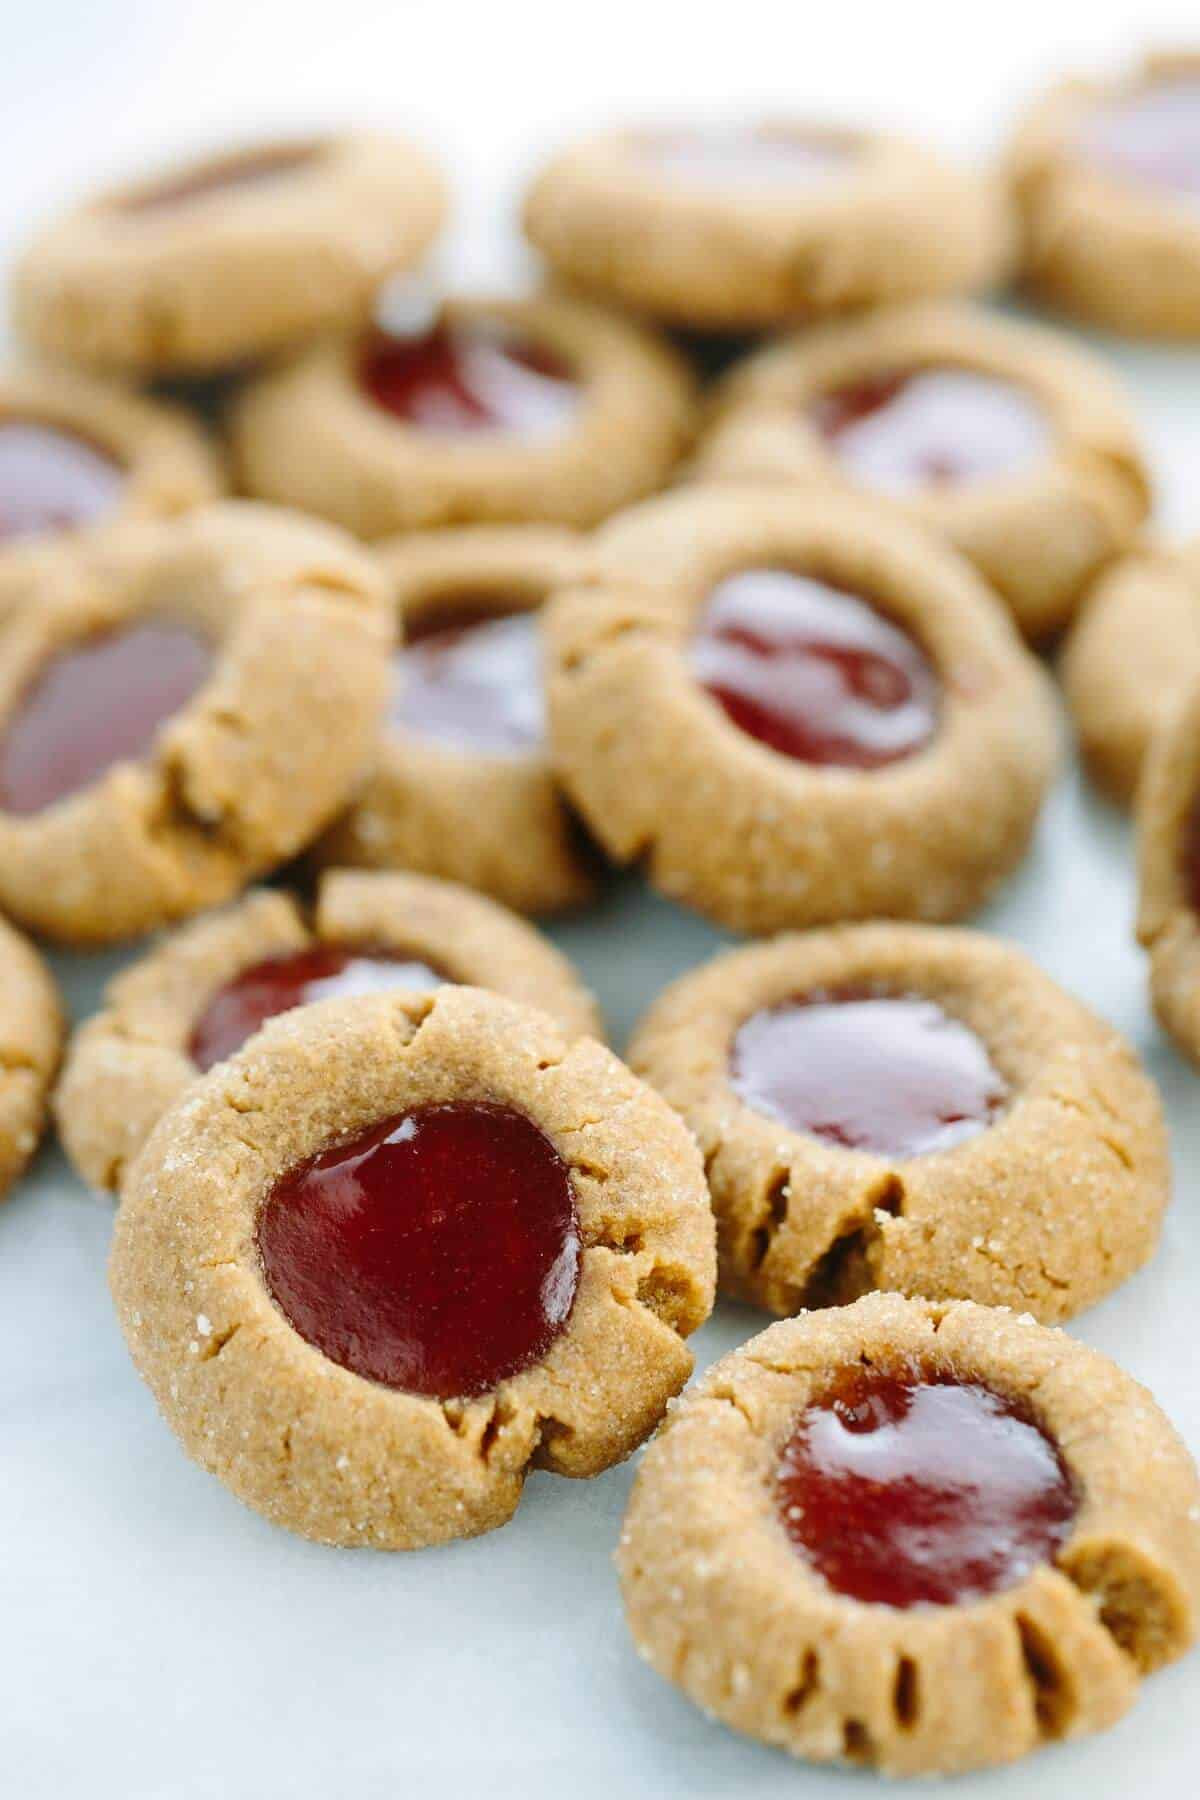 Peanut Butter Cookies Allrecipes
 Flourless Peanut Butter and Jelly Thumbprint Cookies